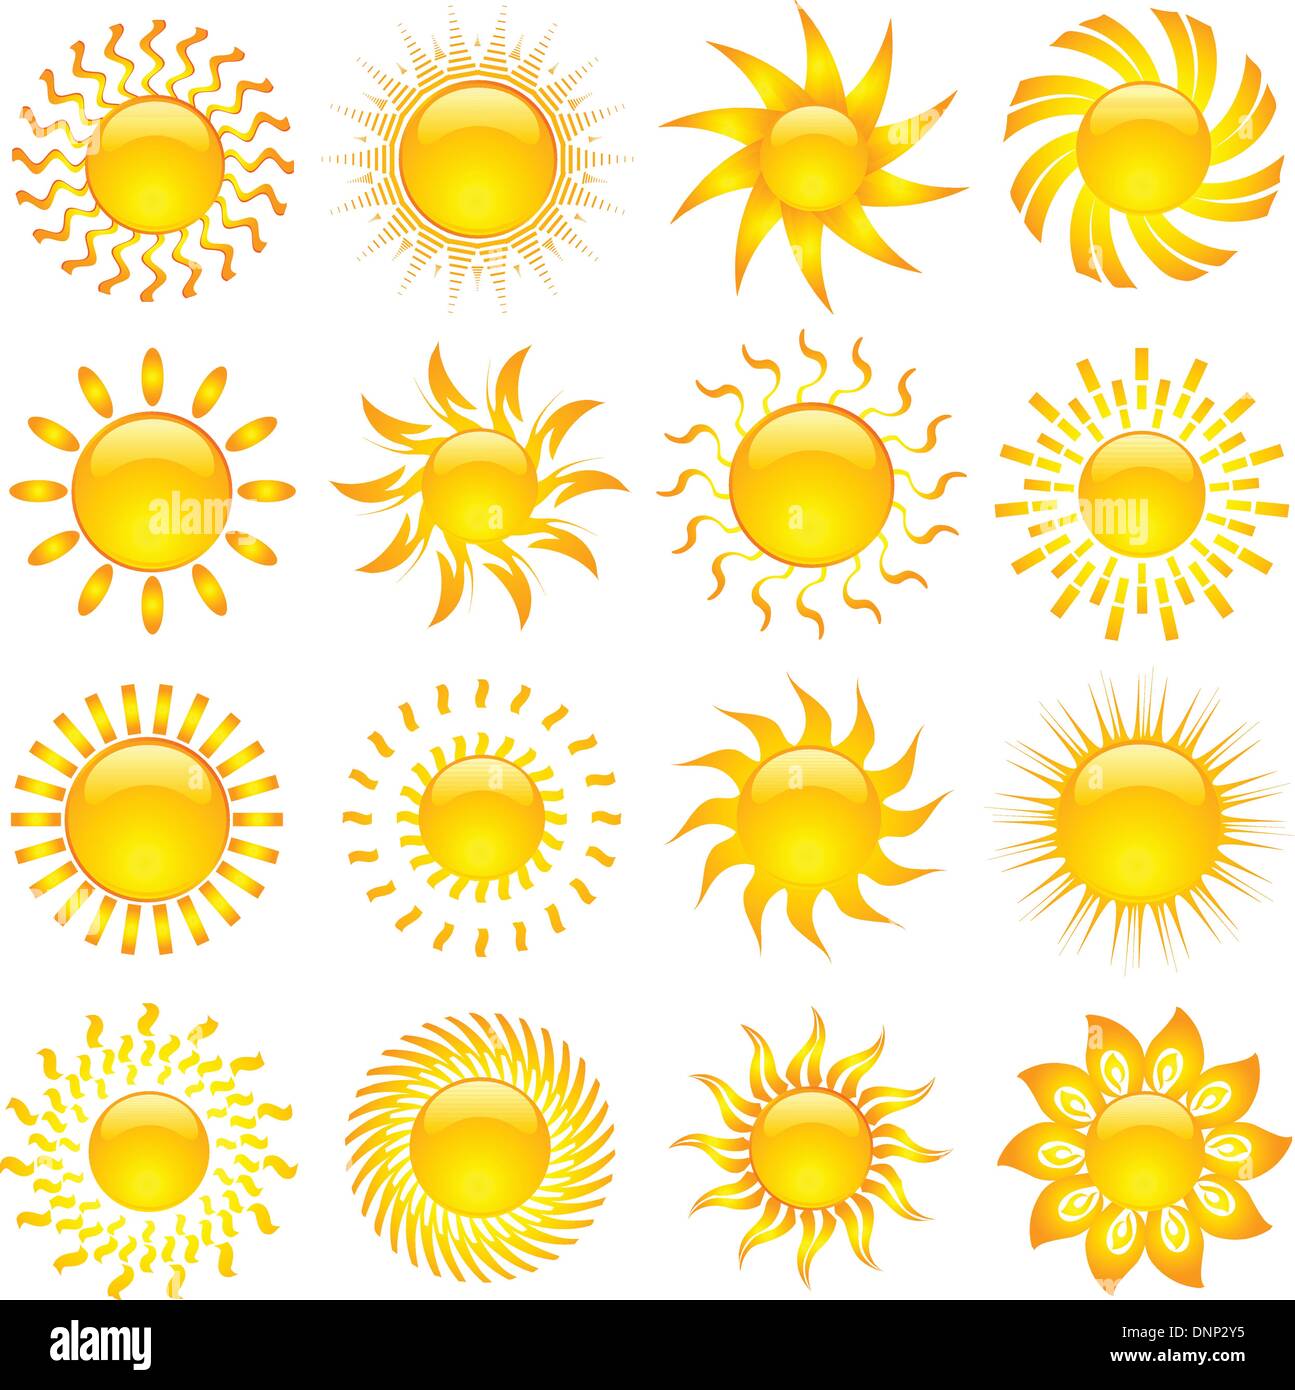 Large collection of various designs of sun icons Stock Vector